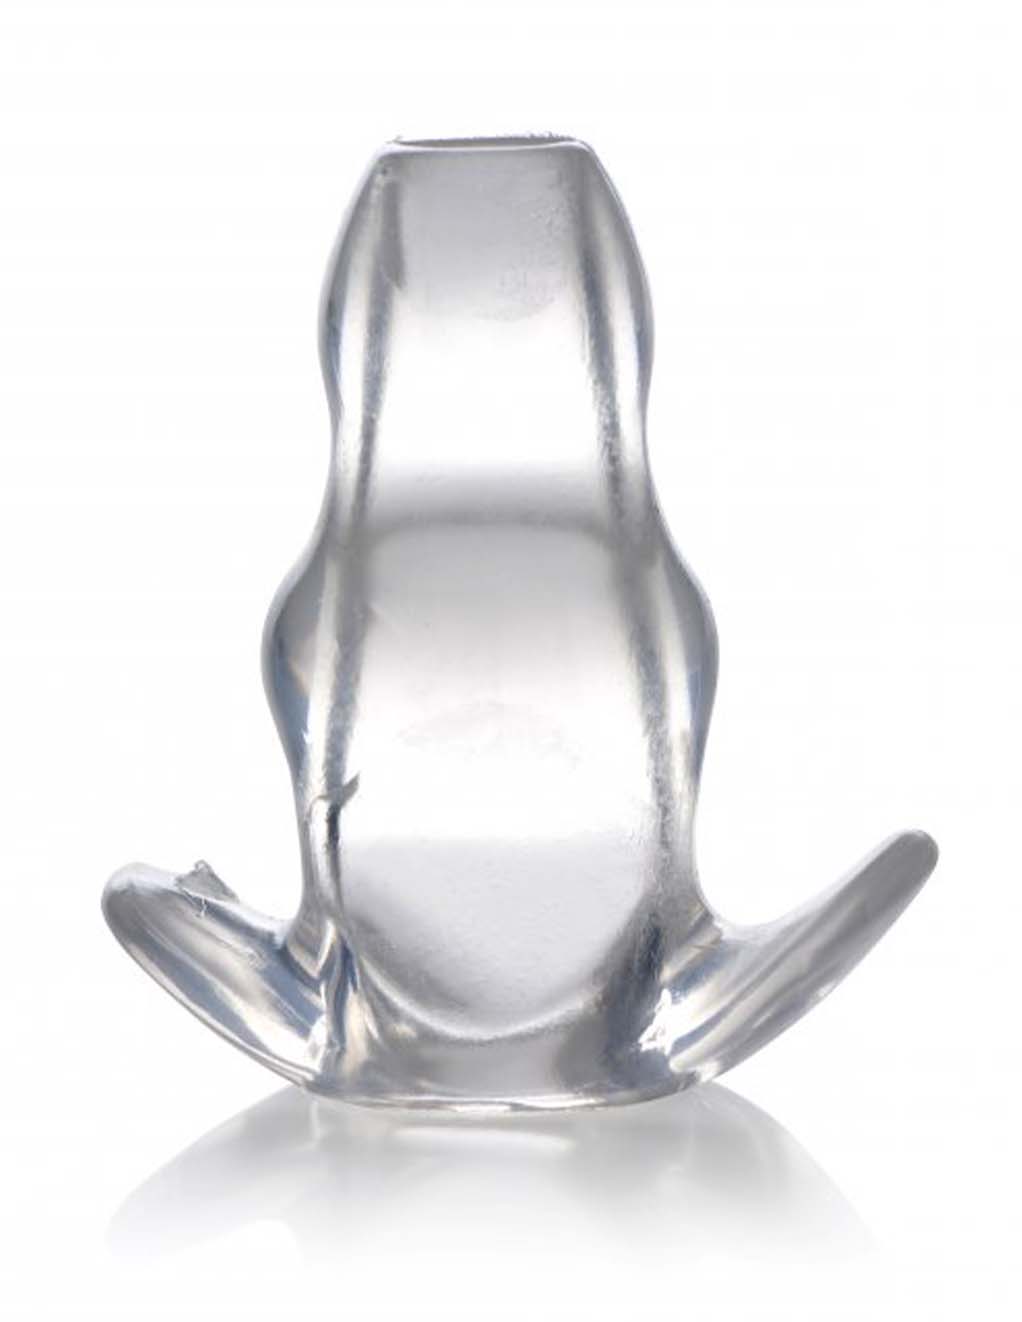 Anal Sex Spreader Hollow Body-Safe Silicone Butt Plug Comfort Deep